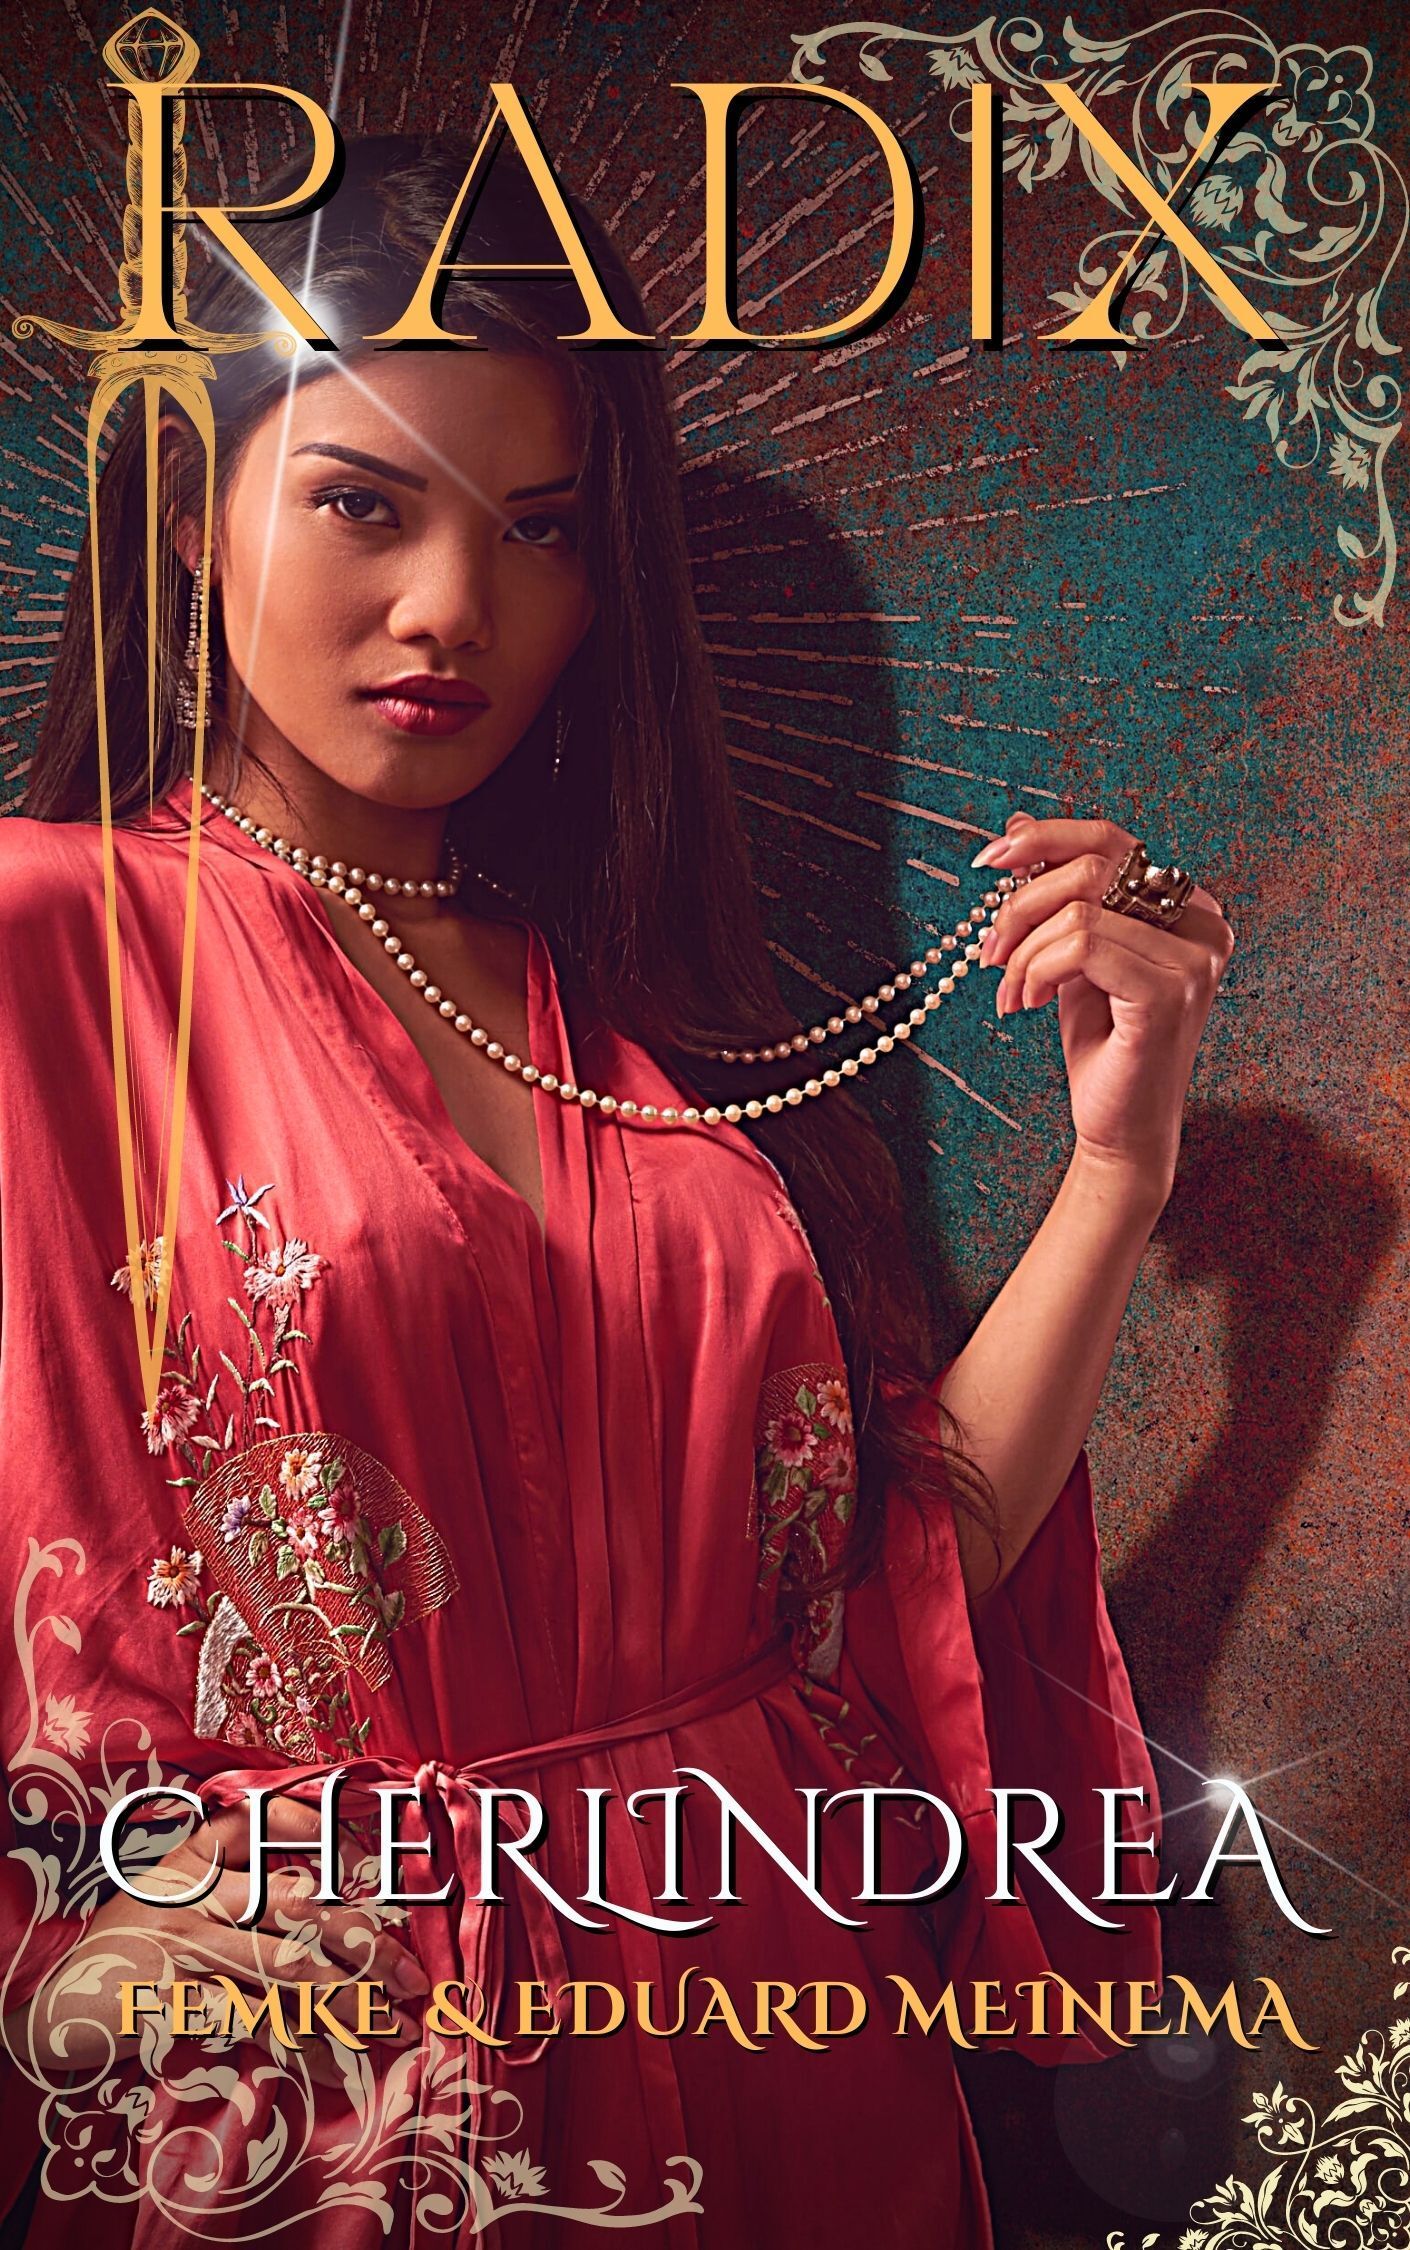 Cherlindrea, Radix Book # 2, Urban Fantasy series about the witches of the Void and Awides